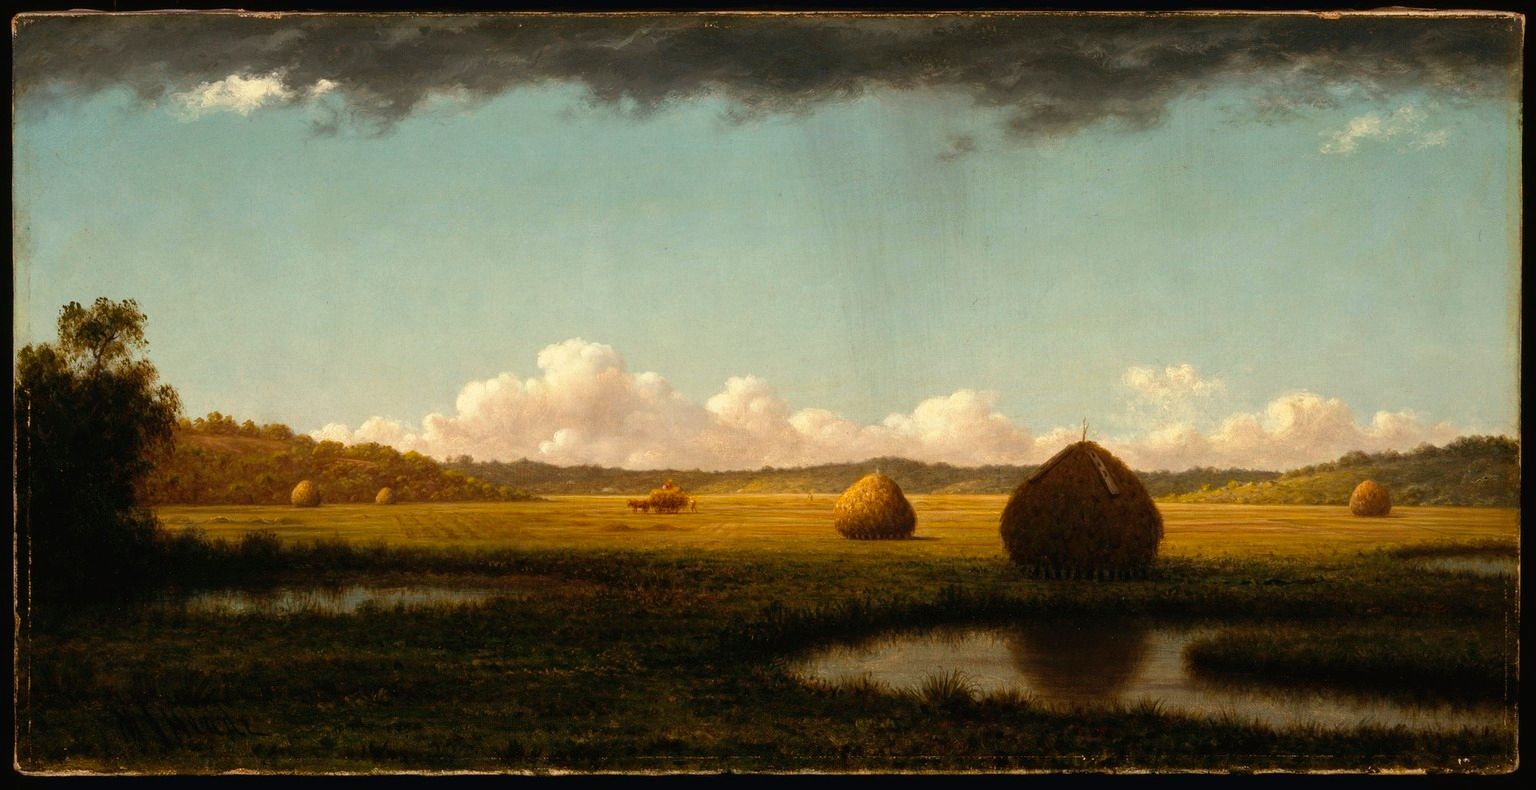 Large bales of hay glow on a patch of sunlit farmland. Clouds shadow some bordering wetlands.